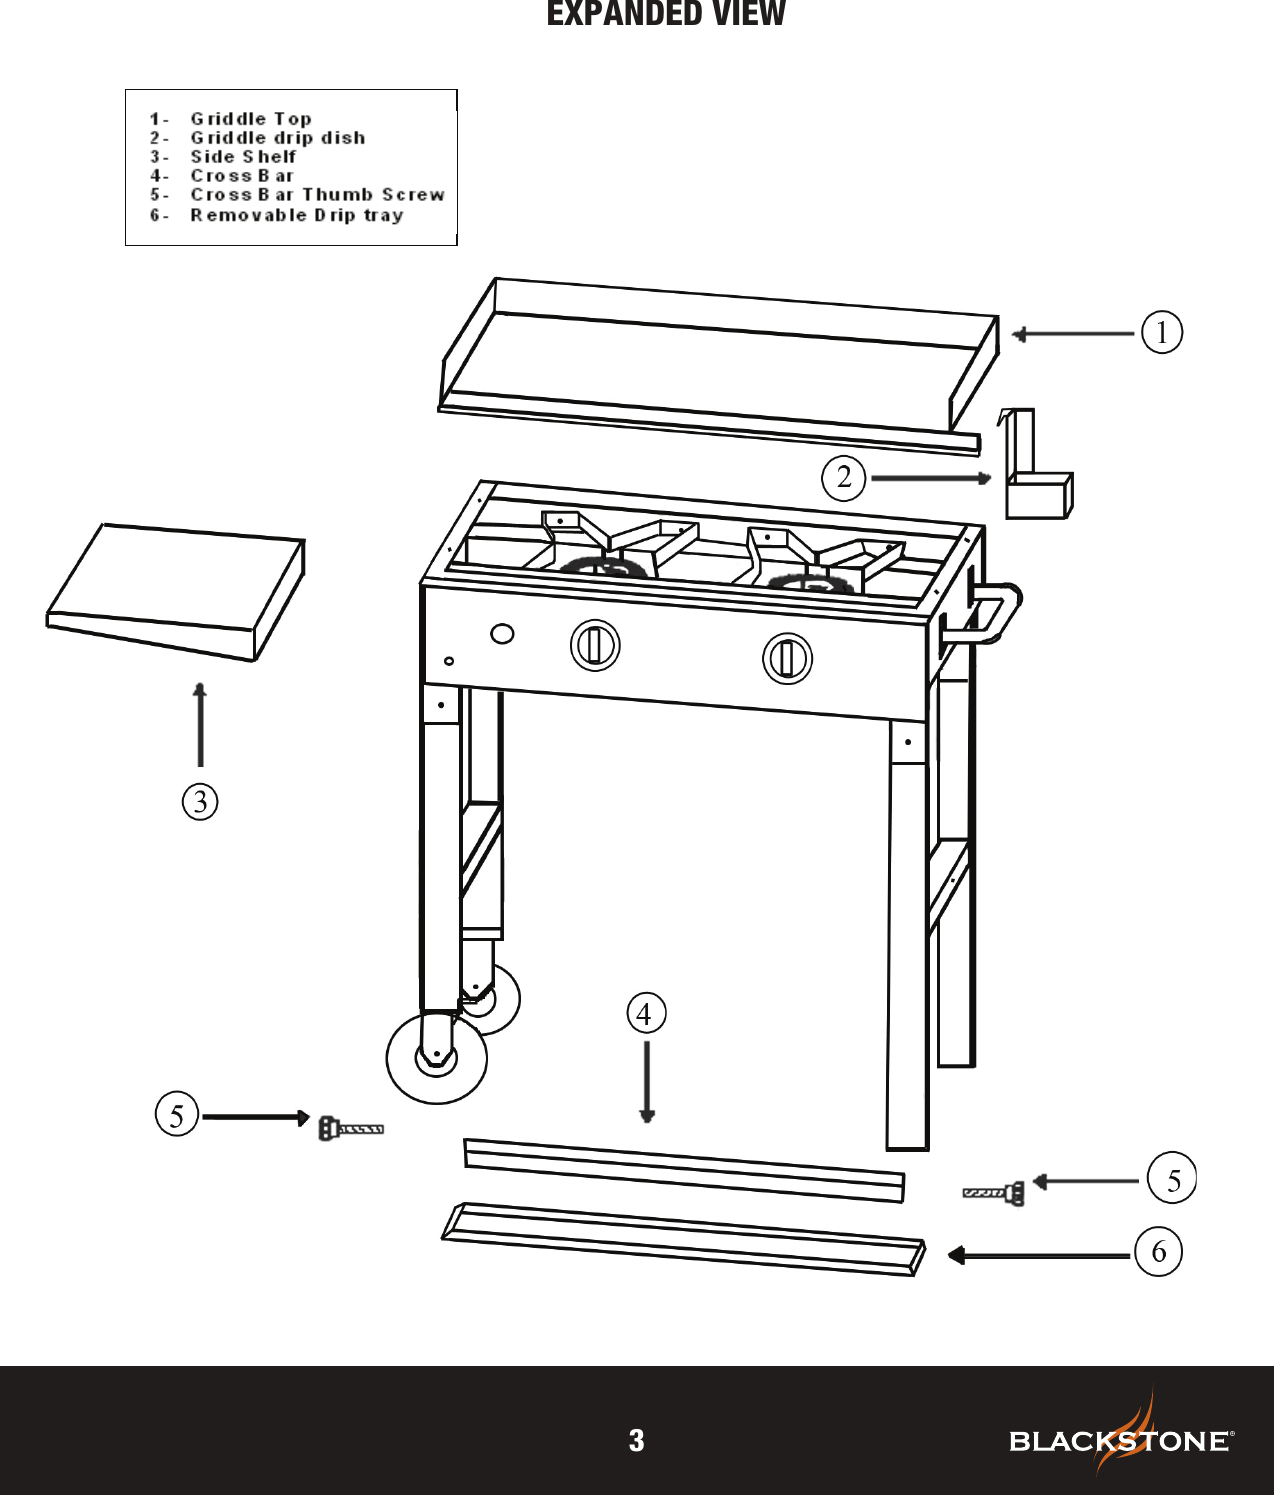 Page 3 of 11 - The-Blackstone-Grill The-Blackstone-Grill-28-Griddle-Cooking-Station-1554-Users-Manual 28 Inch Griddle Manualx